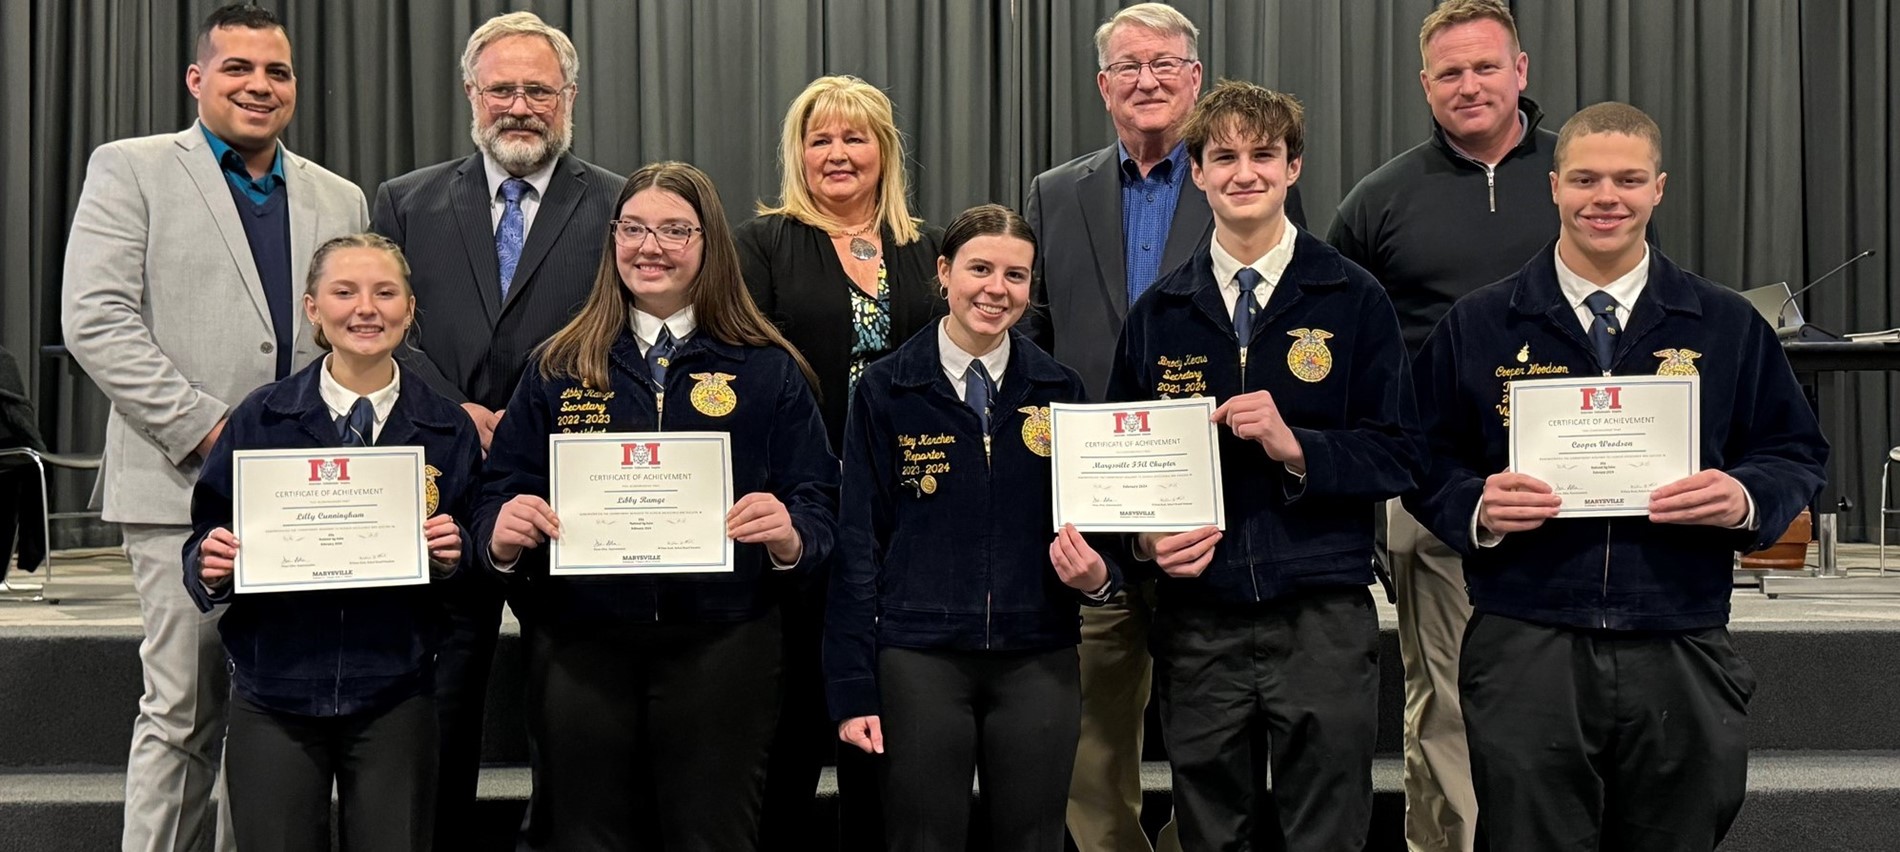 FFA recognition by the Board